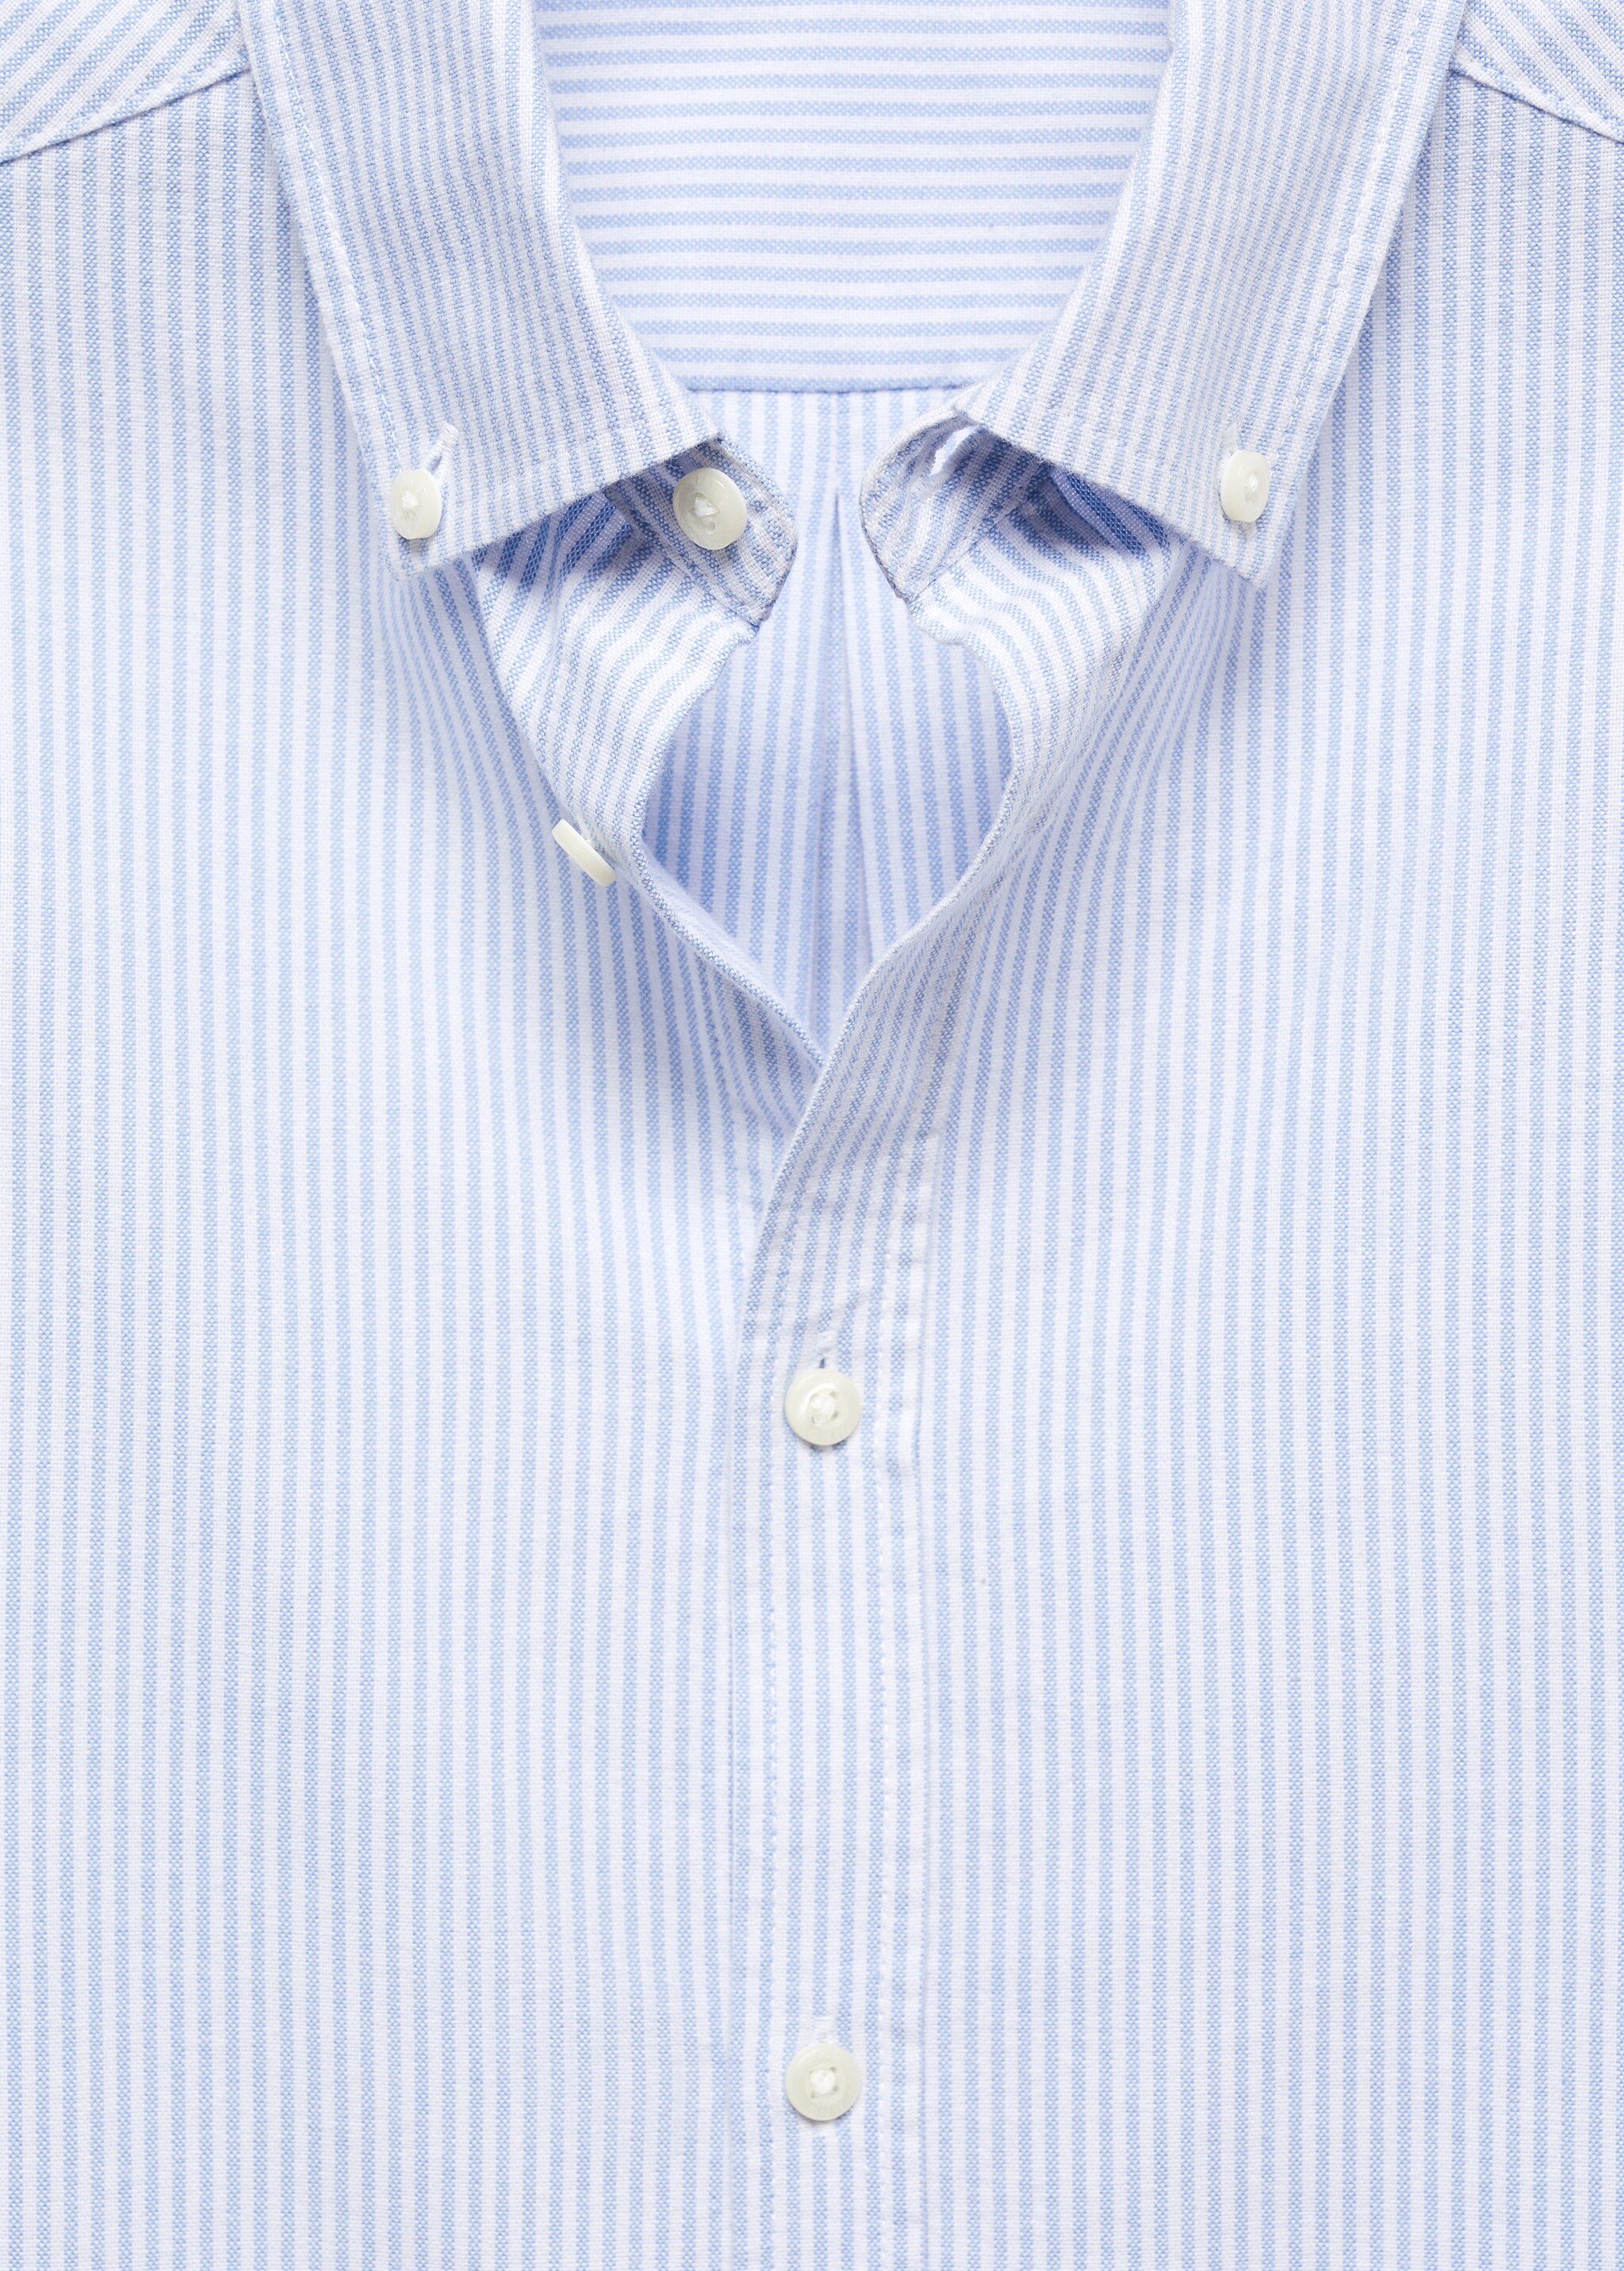 Unisex Oxford Shirt - Details of the article 8